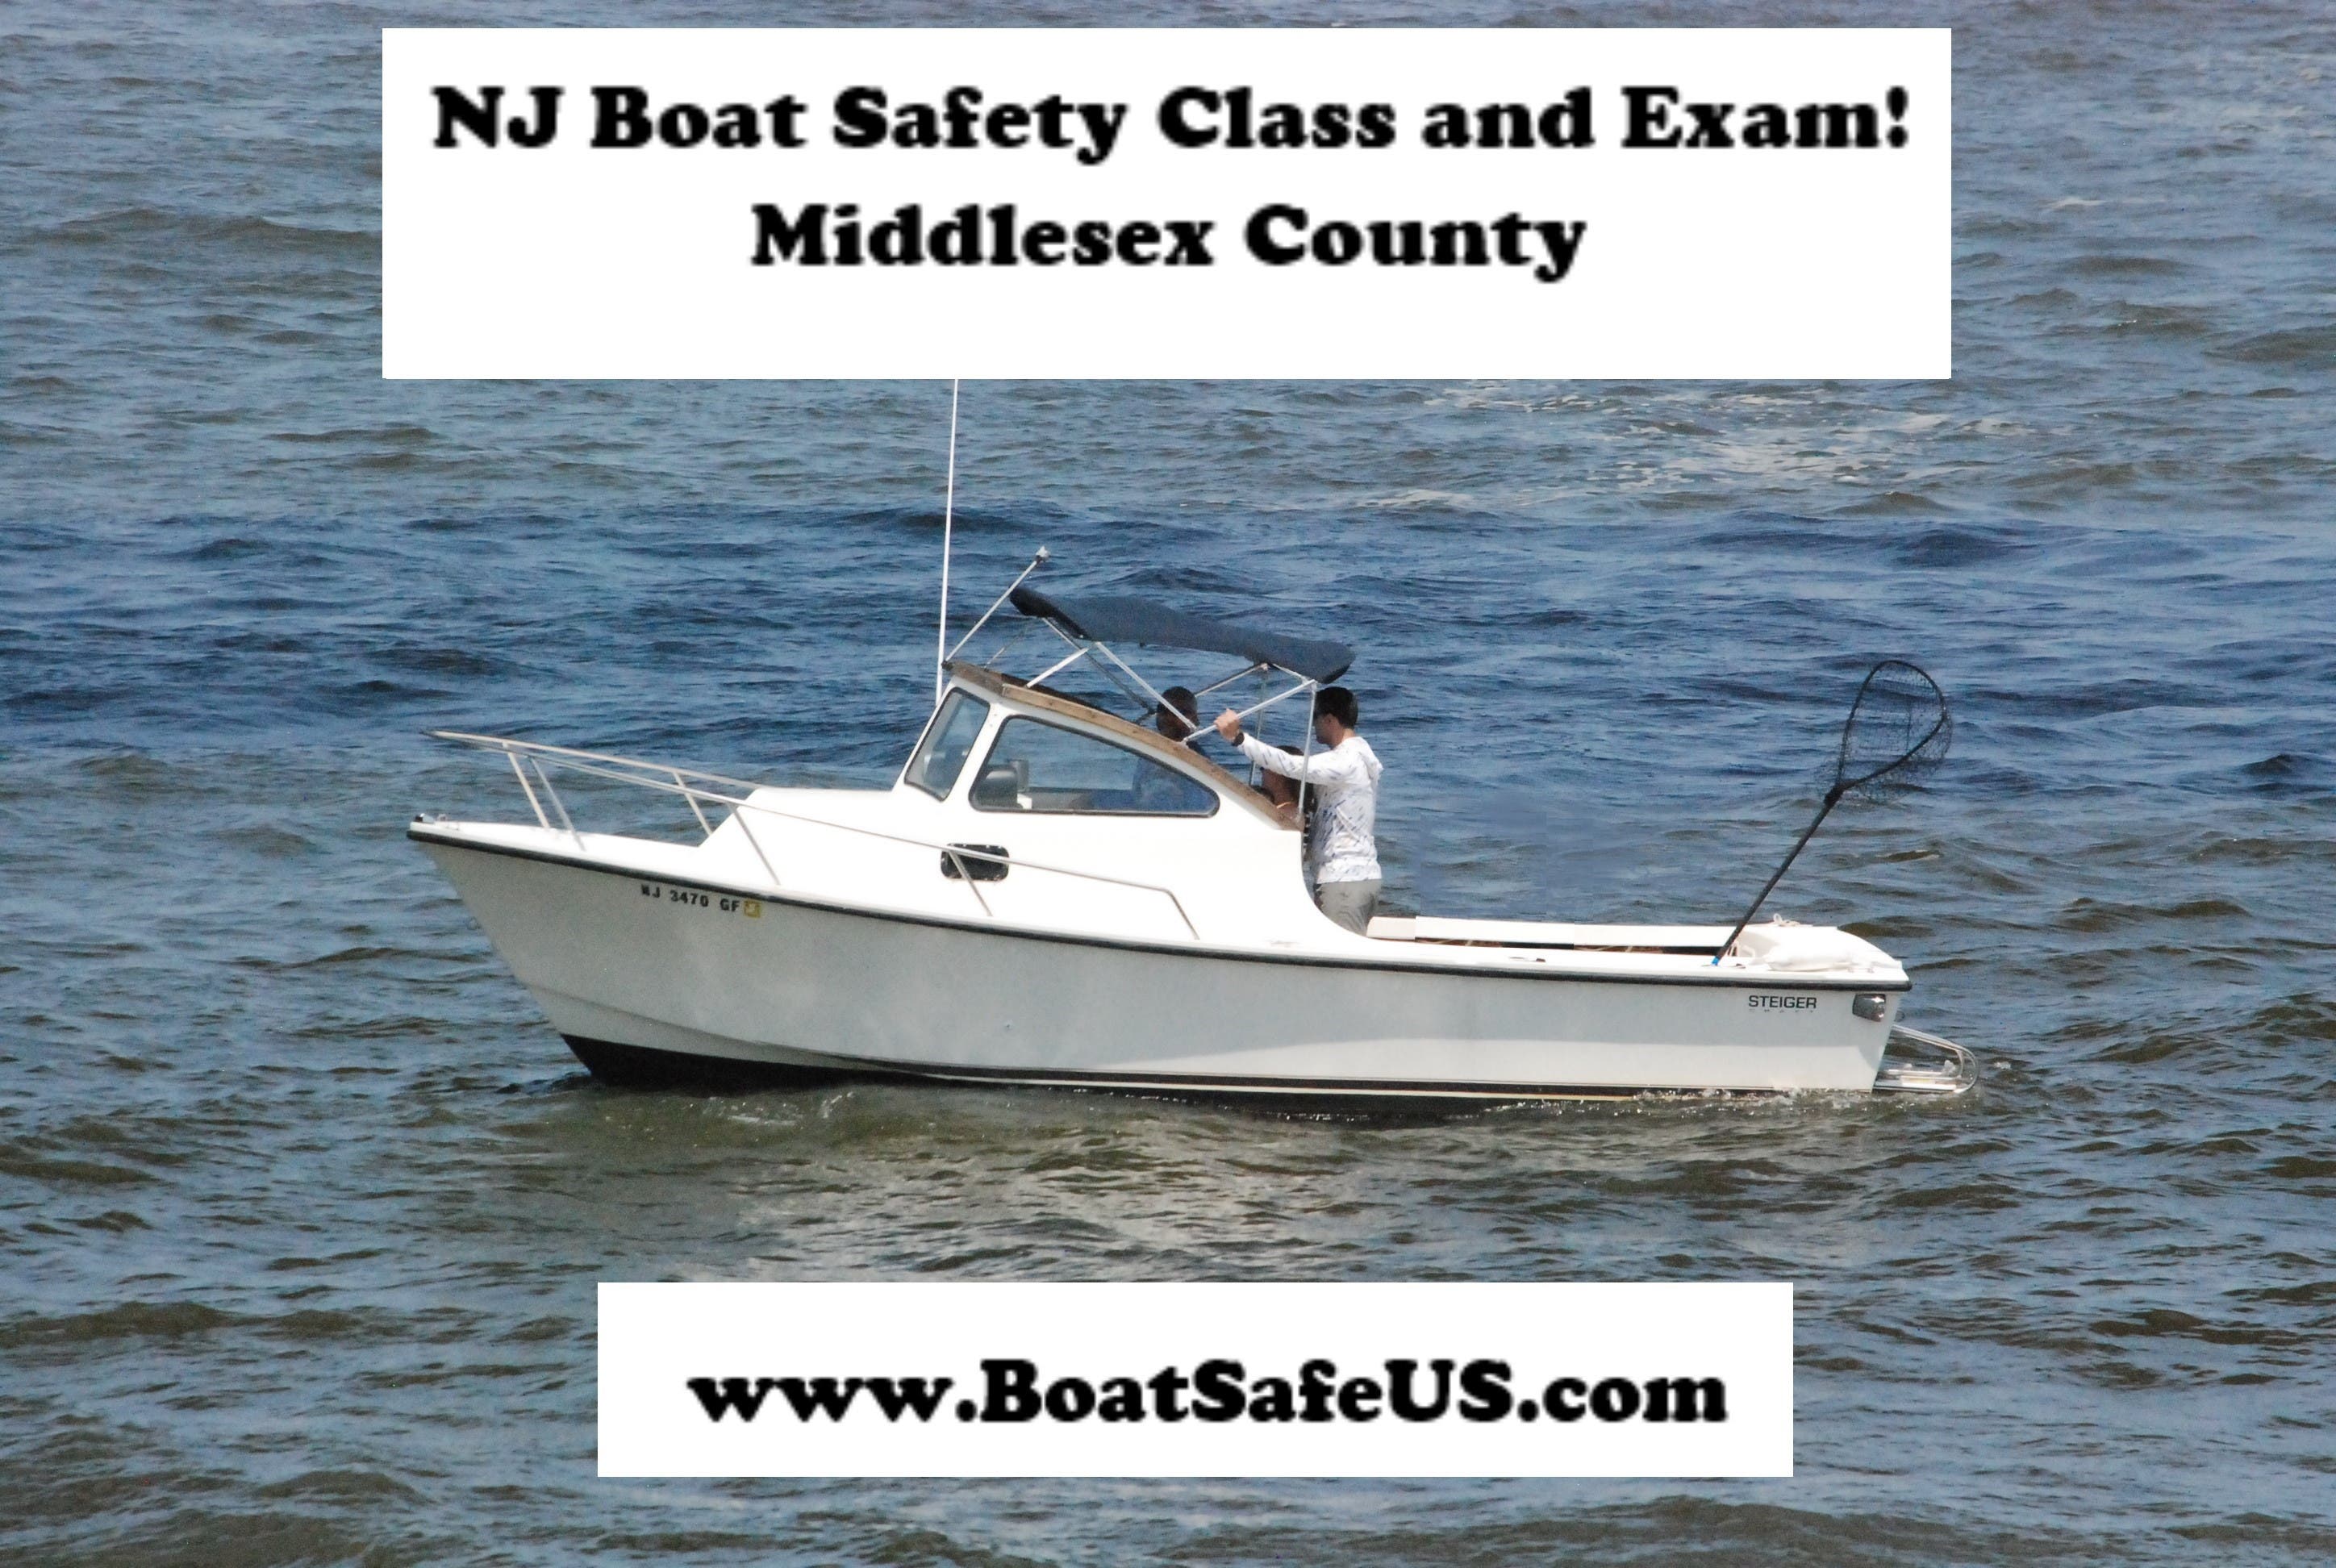 Middlesex County Boat Safety Class and Exam – Required in NJ!